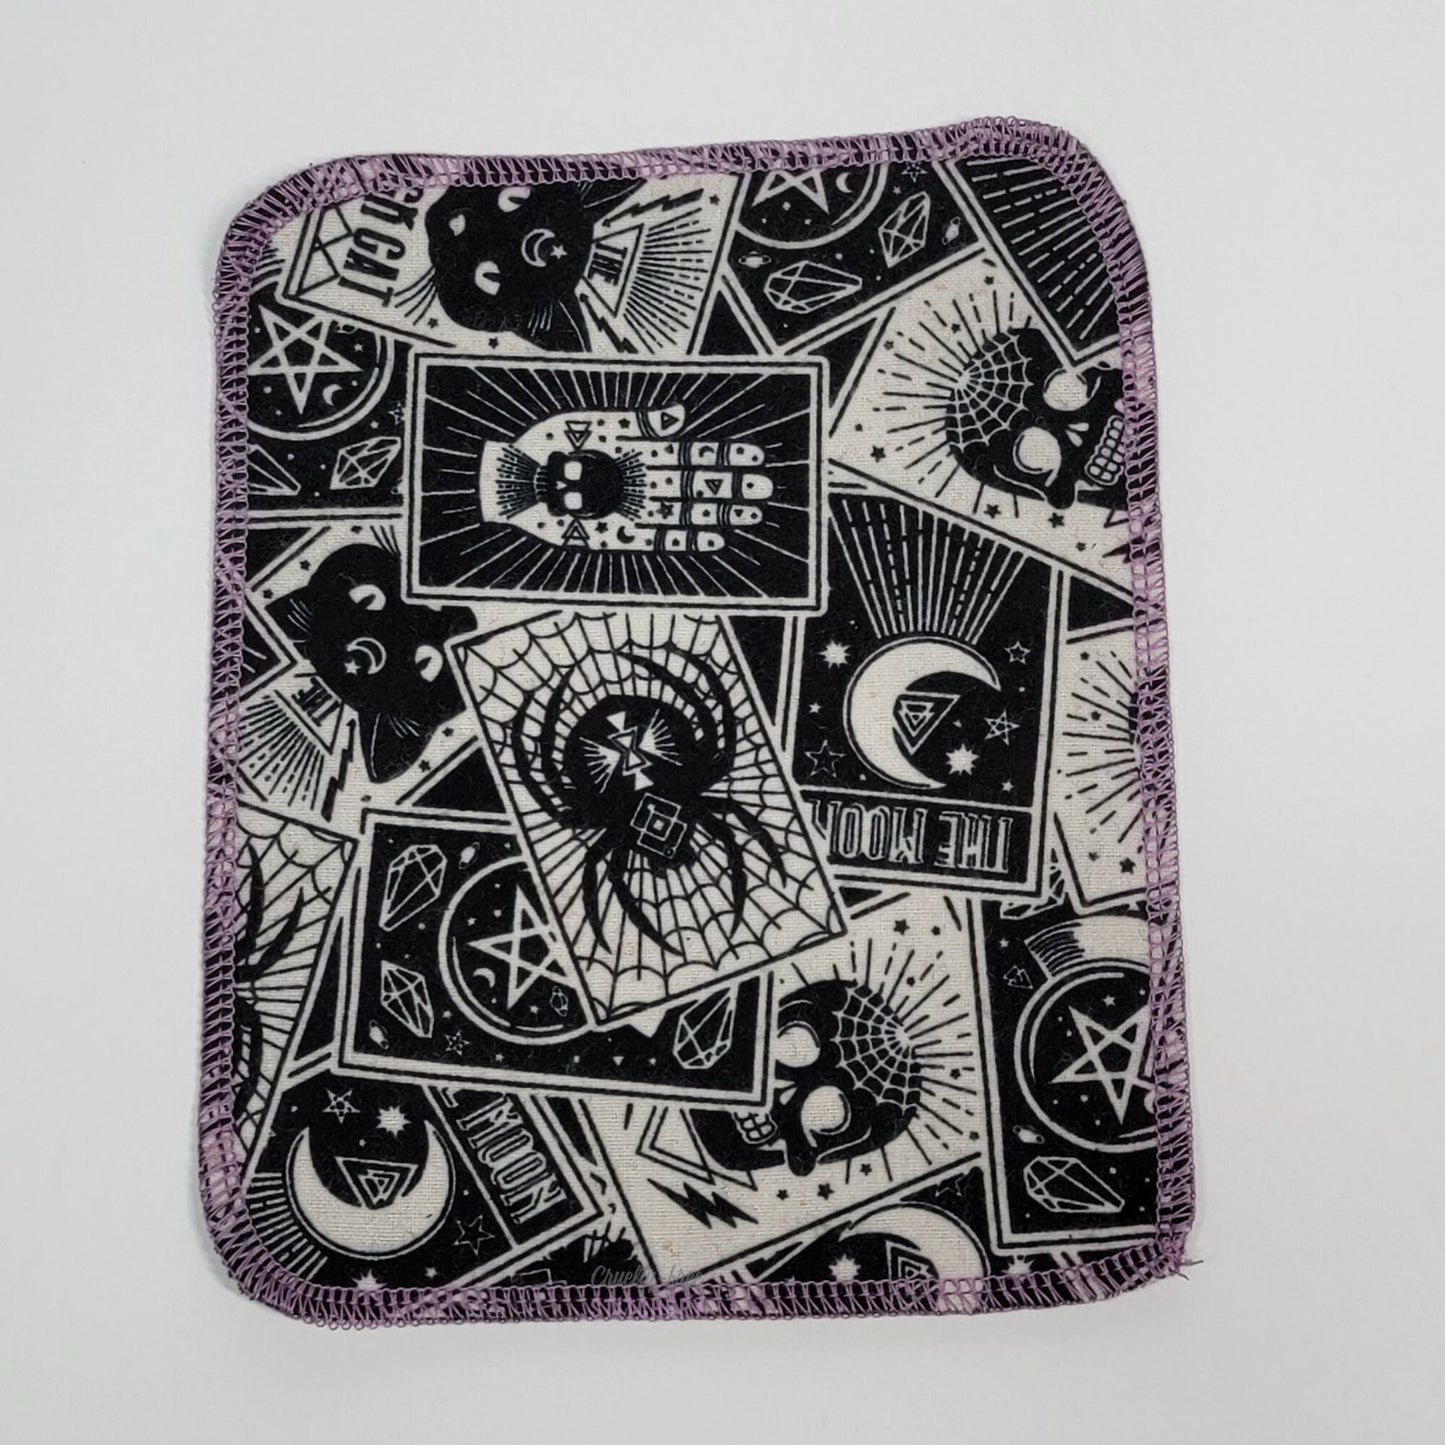 One tarot cards cloth wipe to show the full print with the various tarot cards, such as the moon, a skull, spider, black cat, etc.